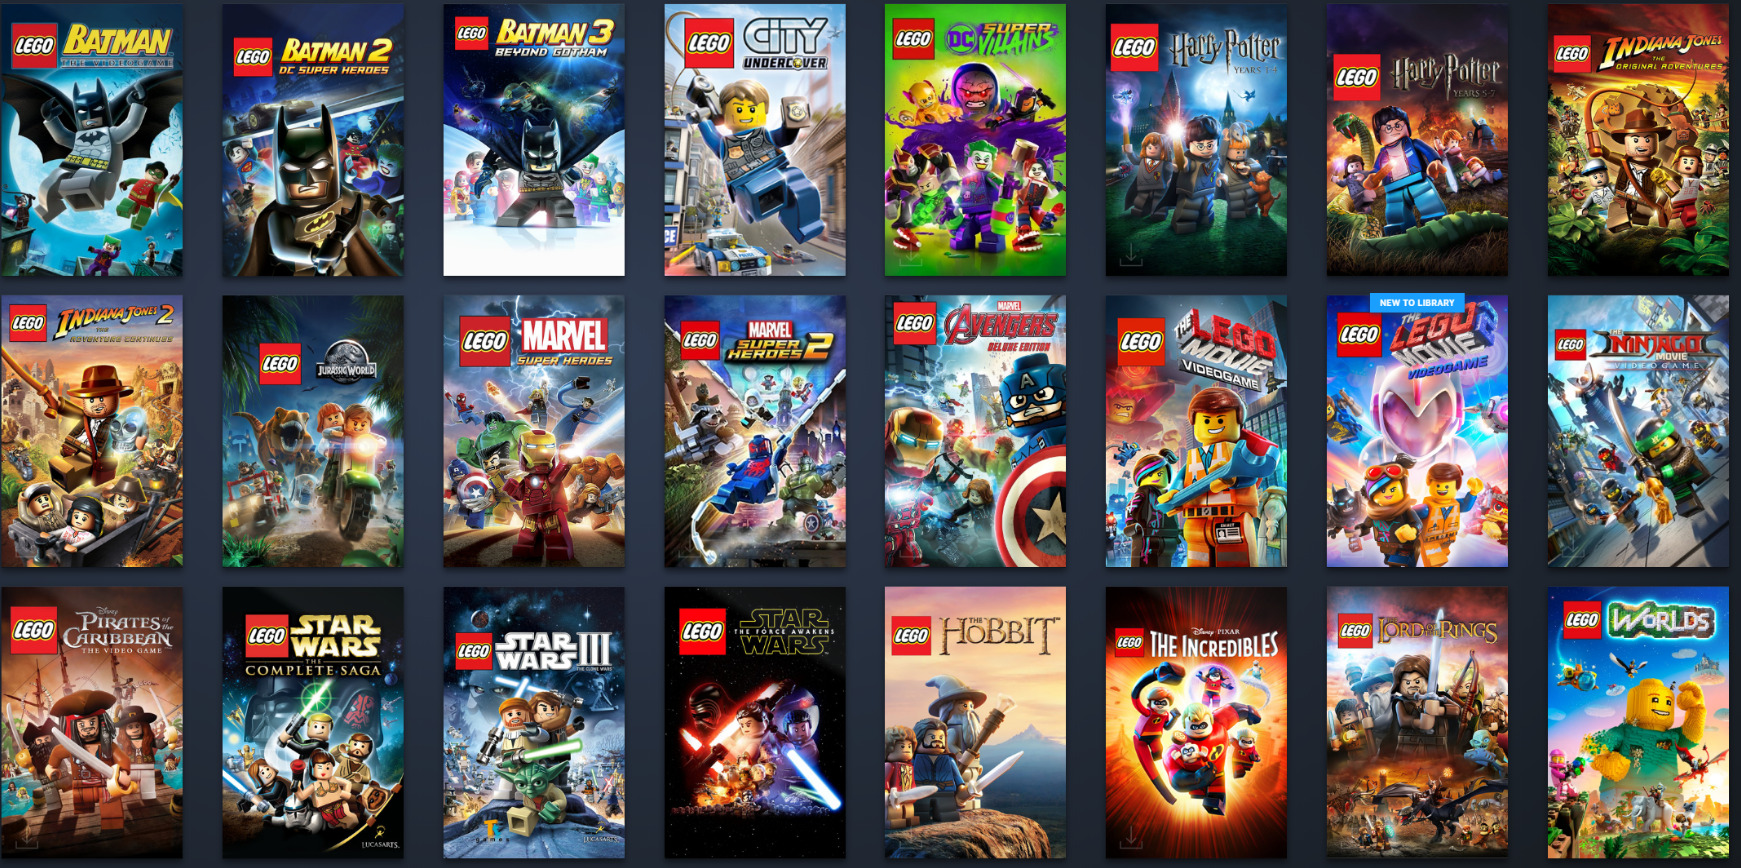 5 Movie Franchises We'd to See Get LEGO Game Treatment - | Movies. Geek Culture.